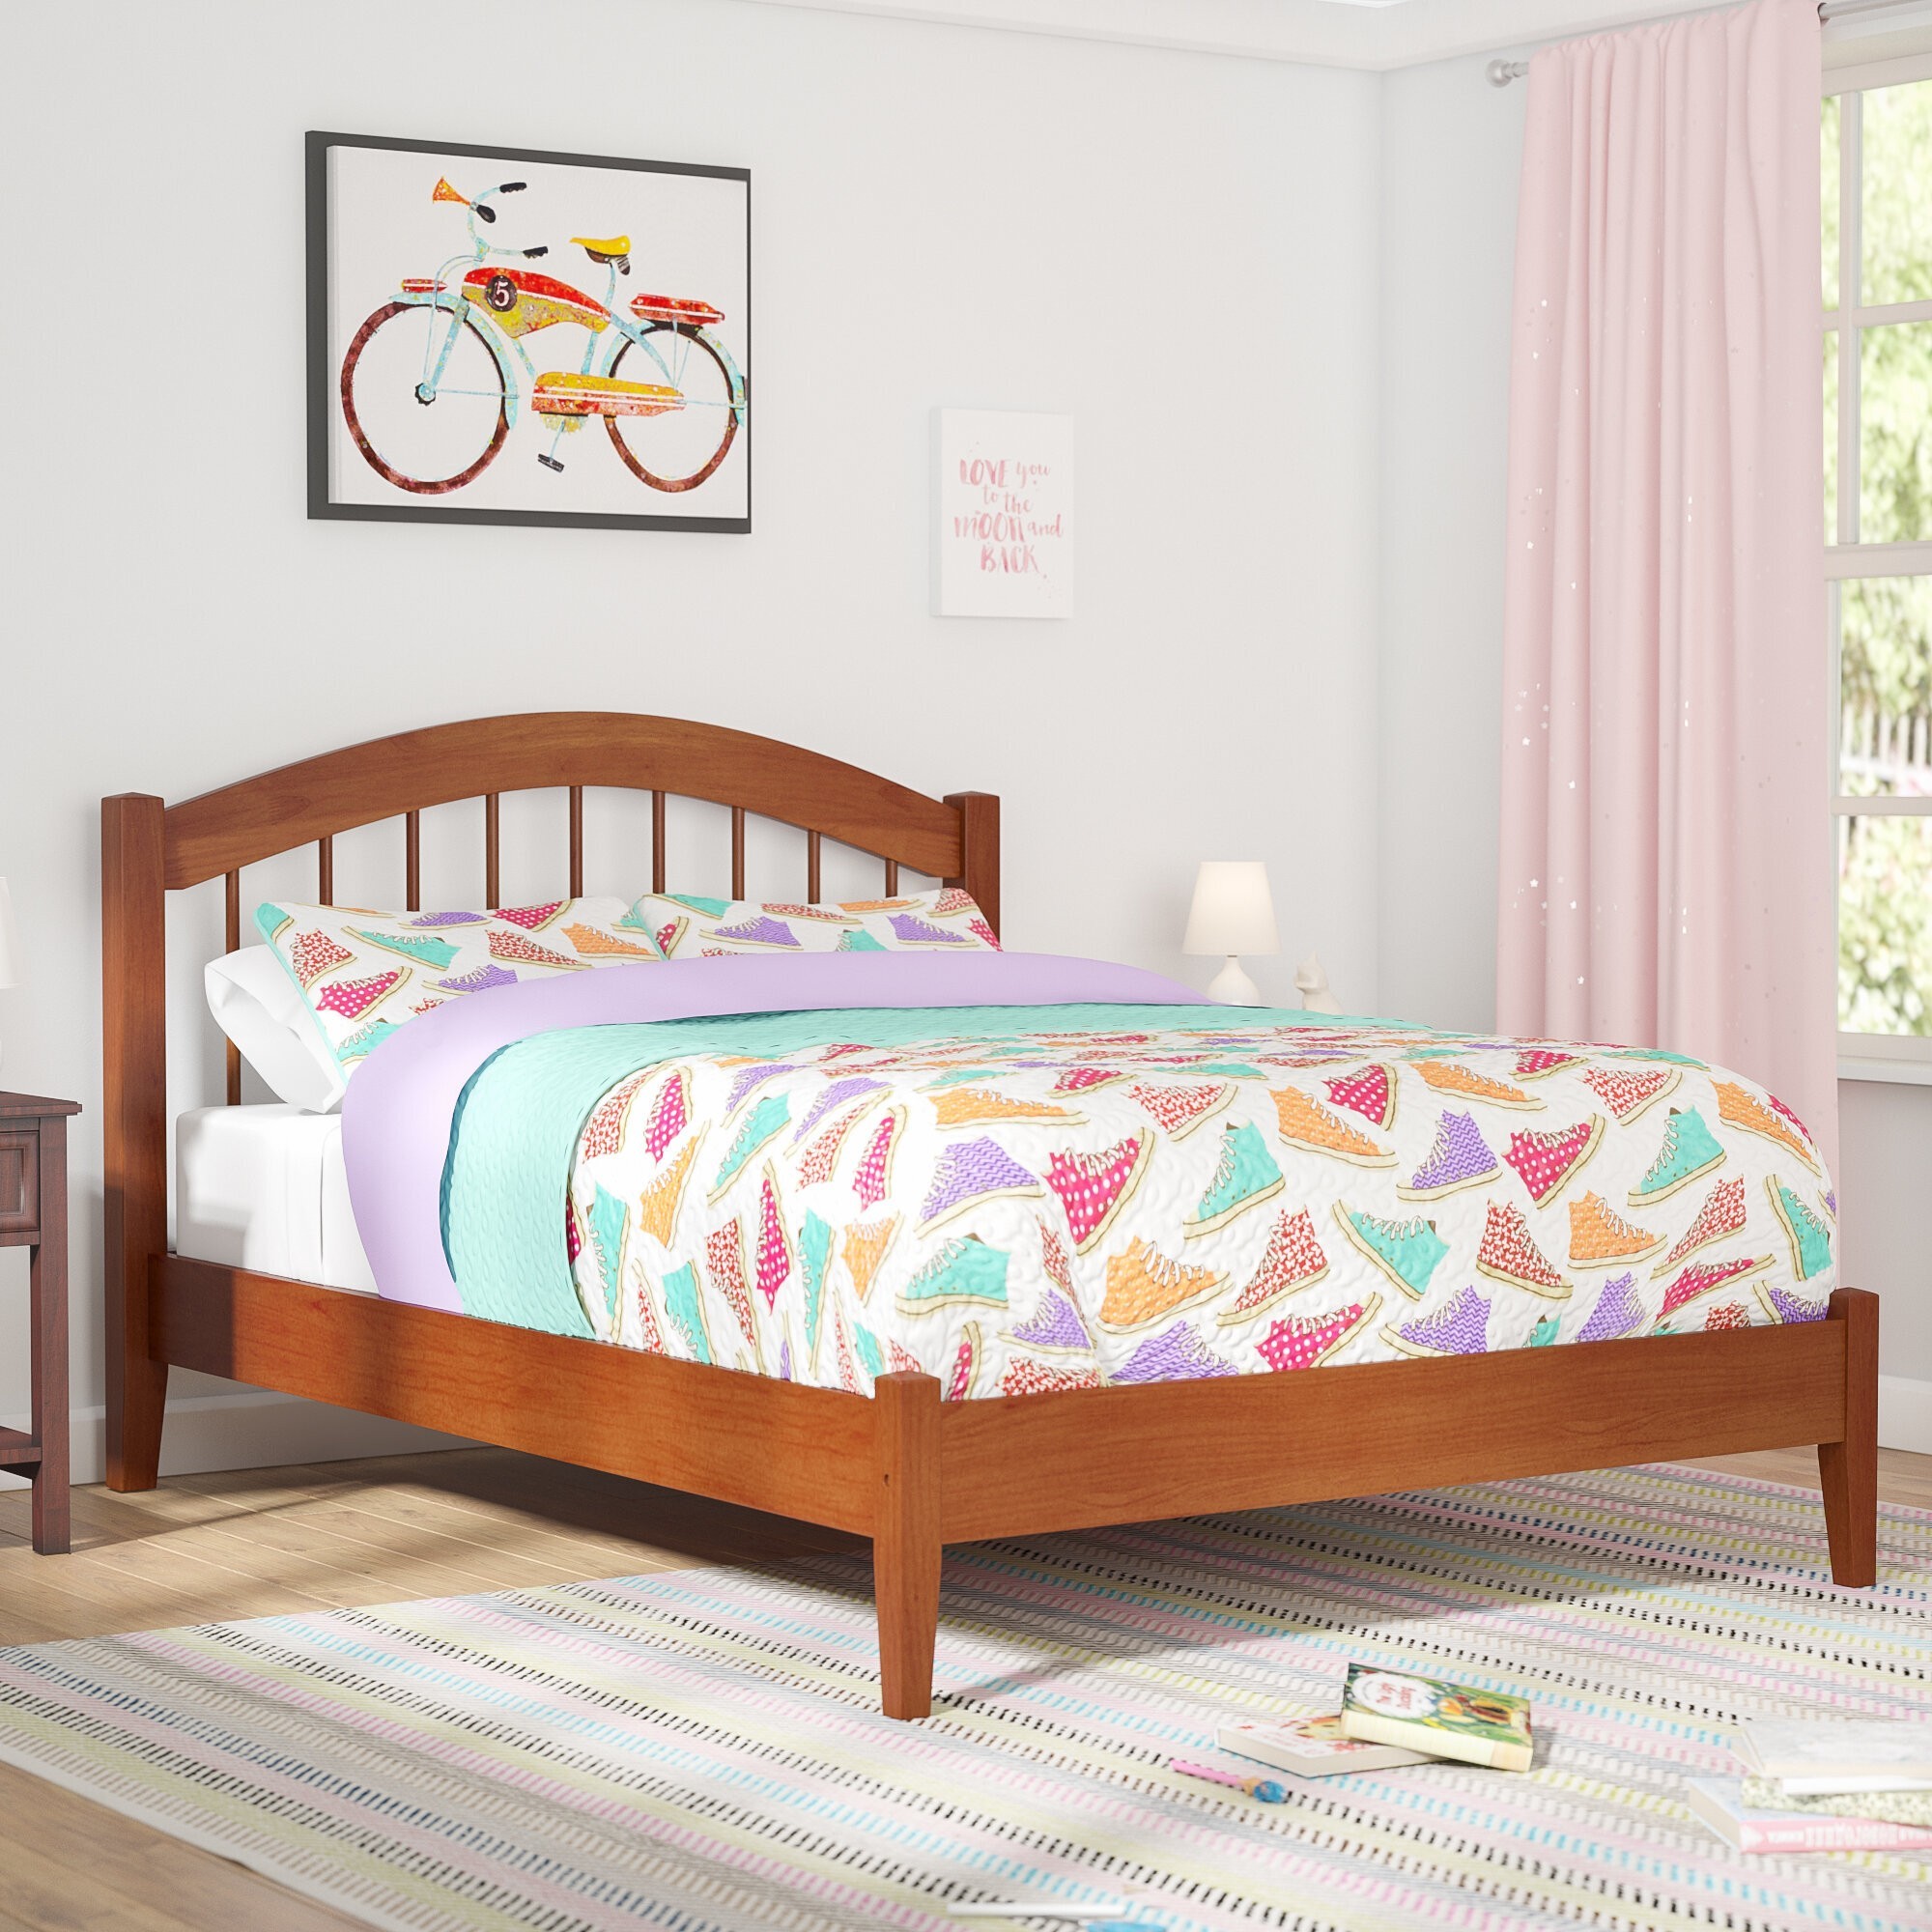 How To Choose A Kids Bed - Foter